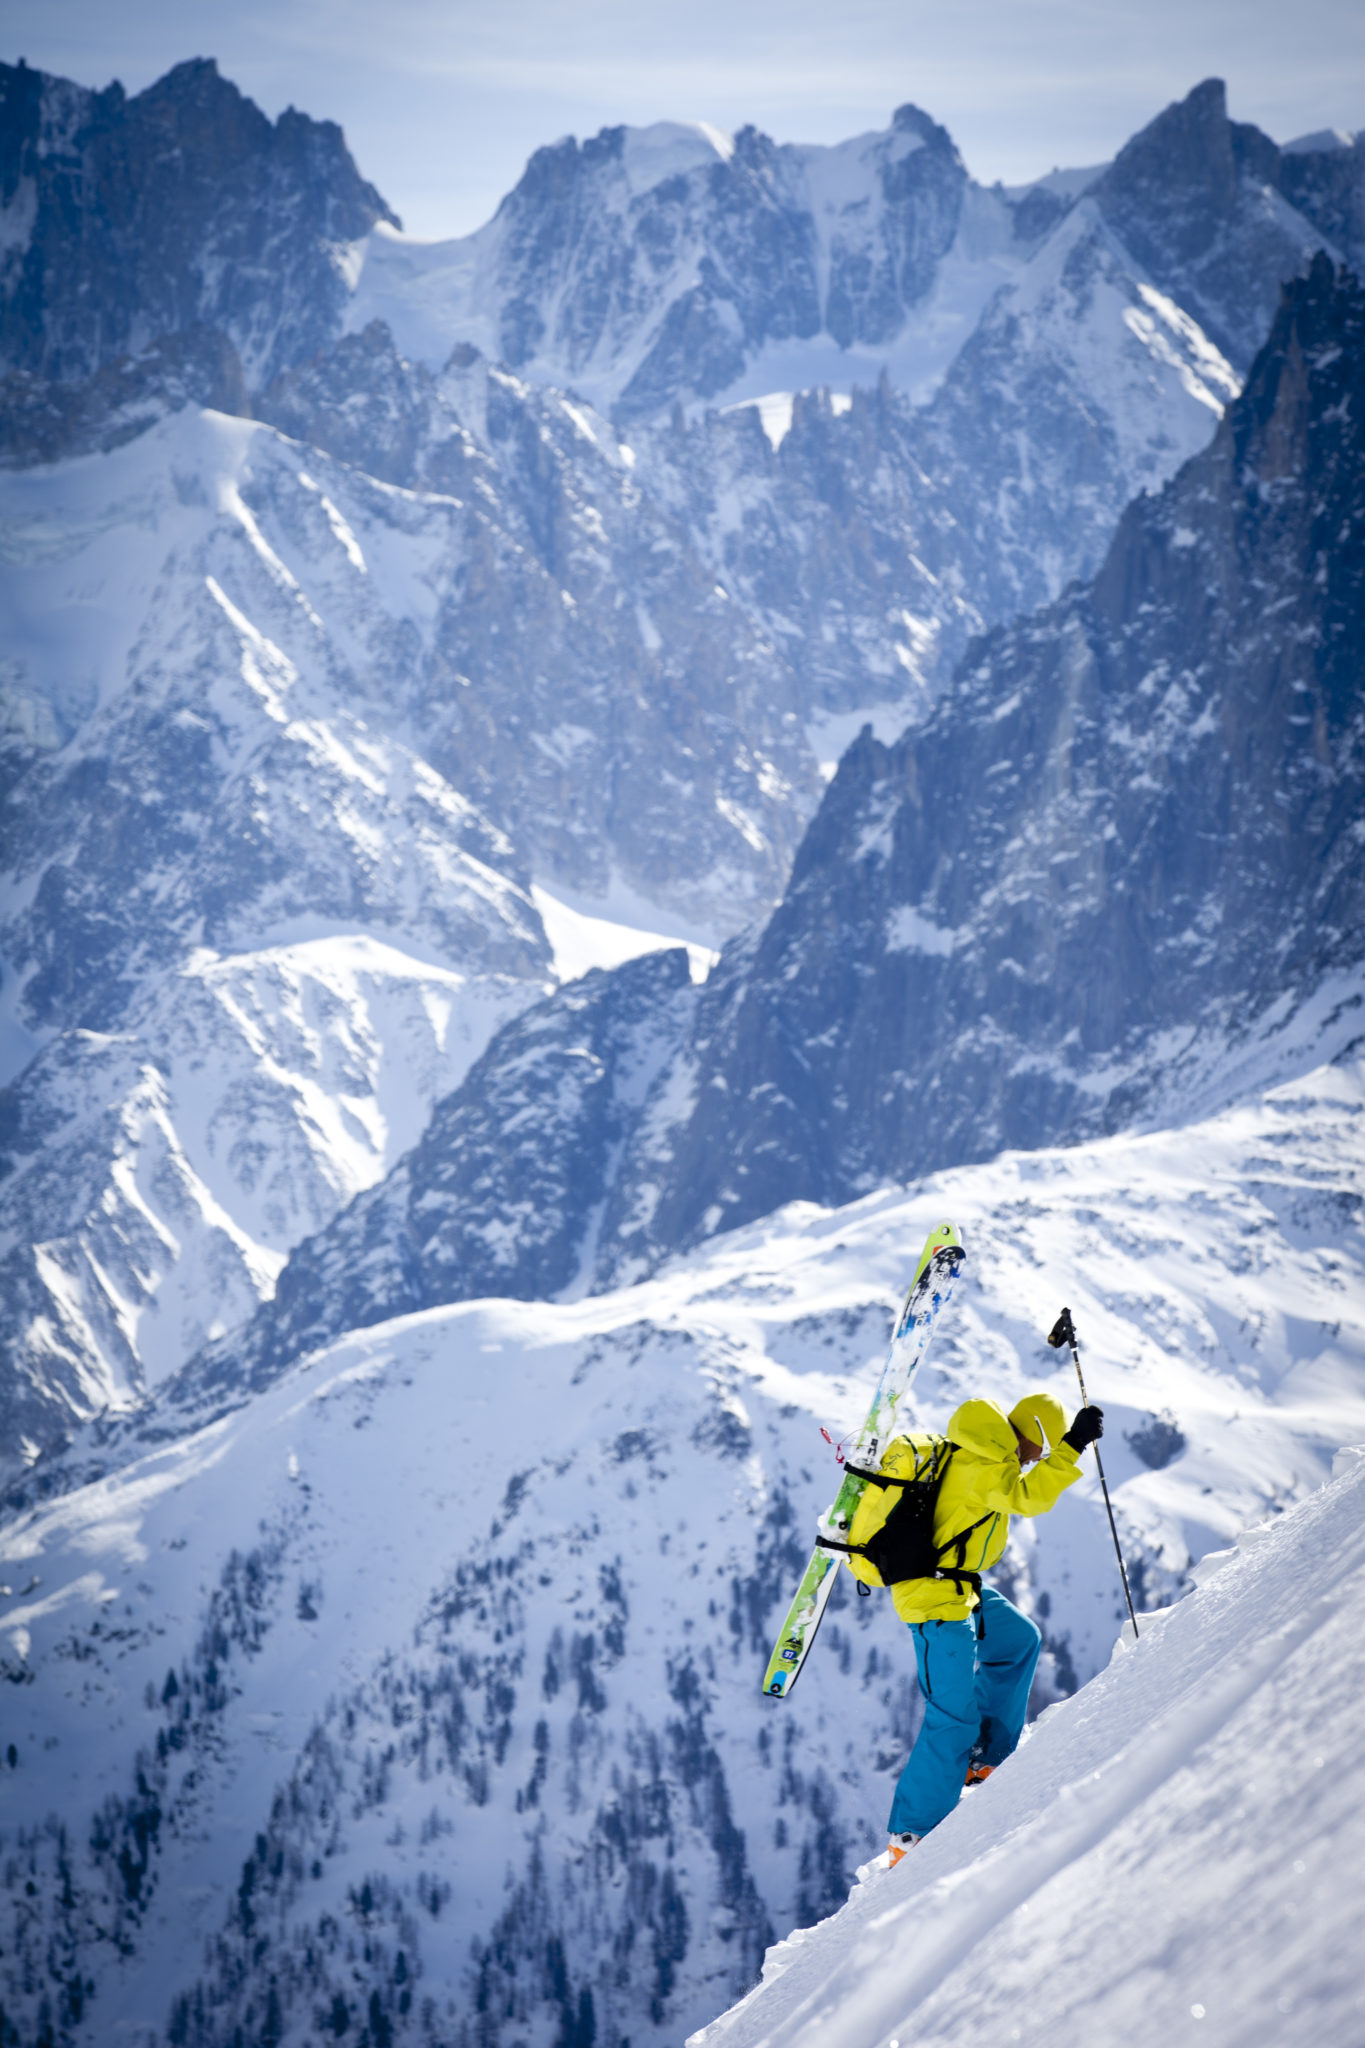 Arc'Teryx: Heli-Ski Jackets & Outerwear of Choice - So What's Up with ...